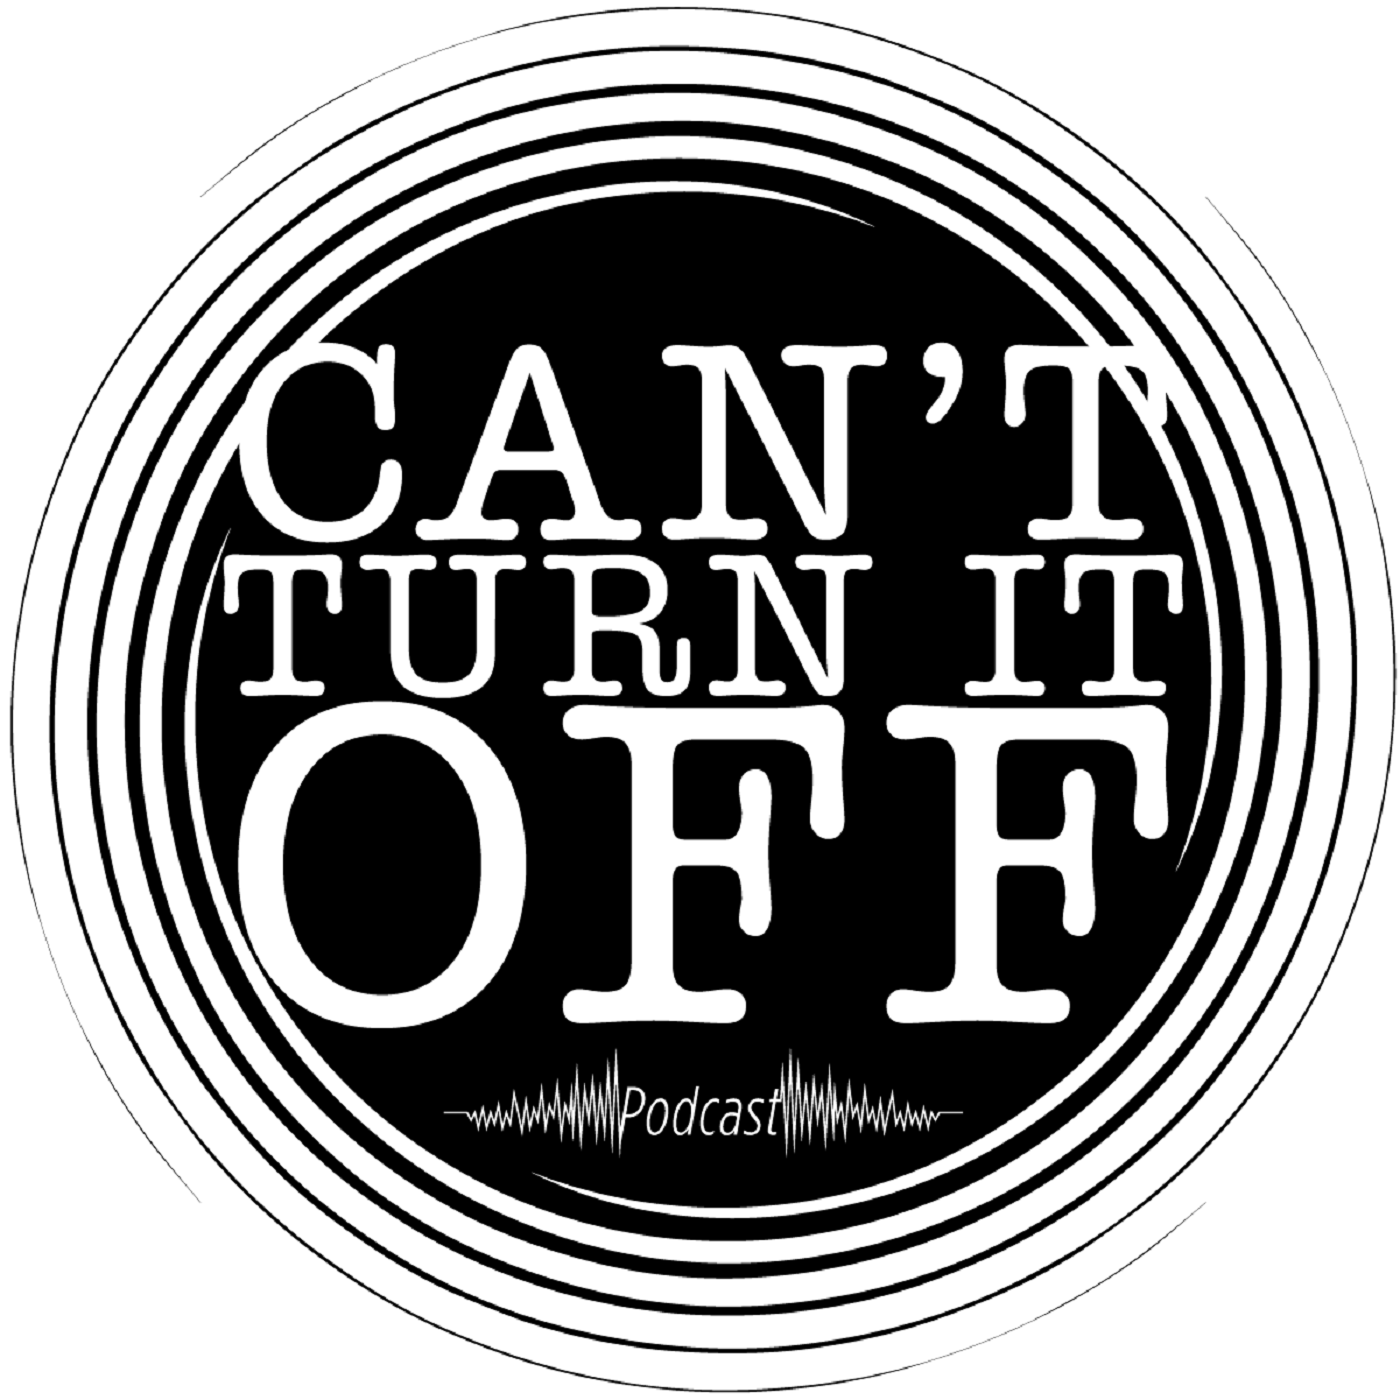 Turn it off. Can't turn back the years картинки. Turn on Podcast. Can i see my Podcast.